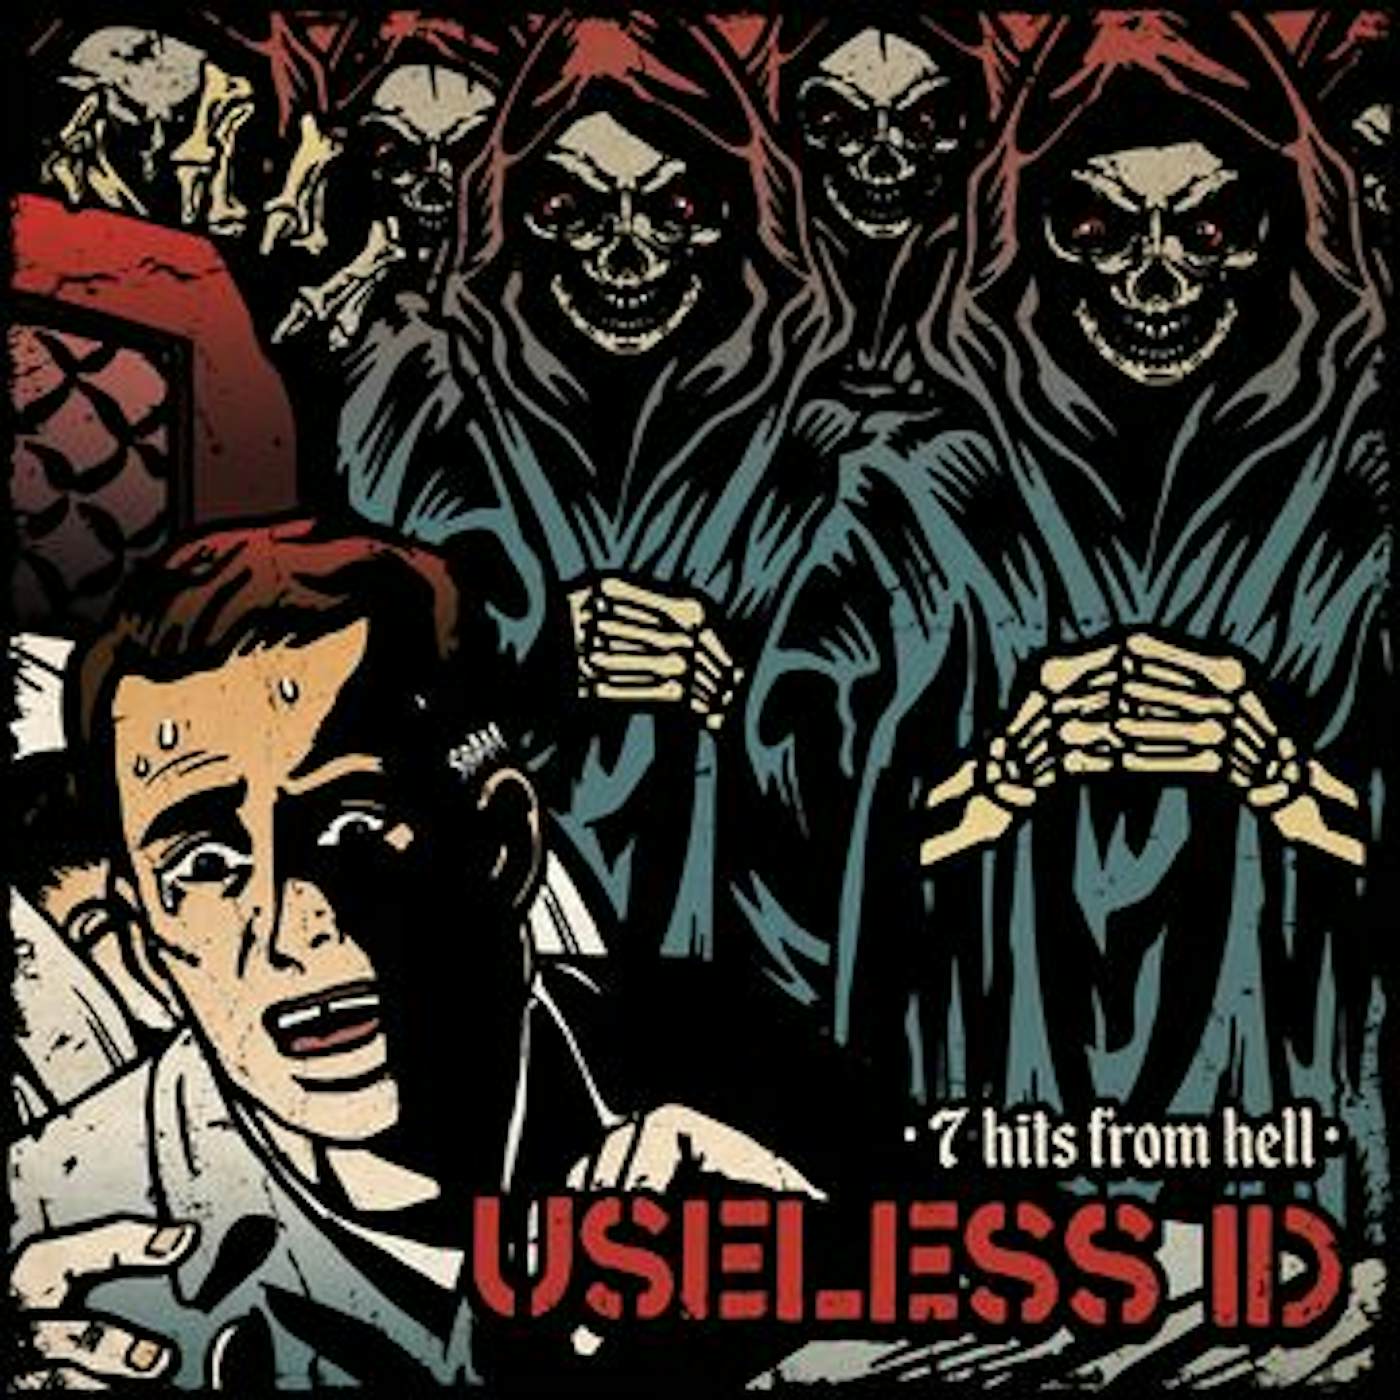 Useless Id 7 Hits From Hell Vinyl Record